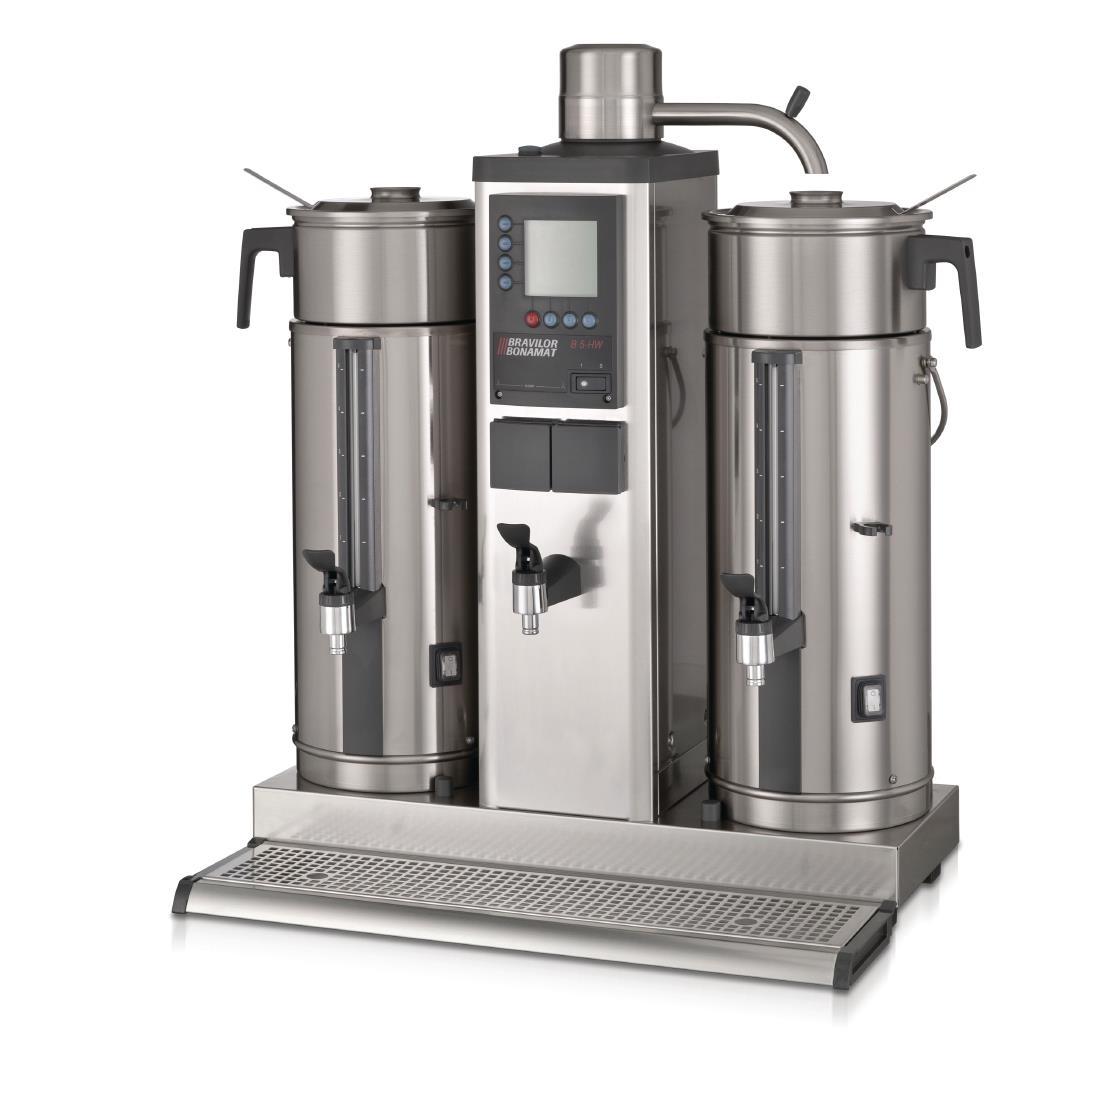 Bravilor B5 HW Bulk Coffee Brewer with 2x5Ltr Coffee Urns and Hot Water Tap Single Phase - DC687-1P  - 1